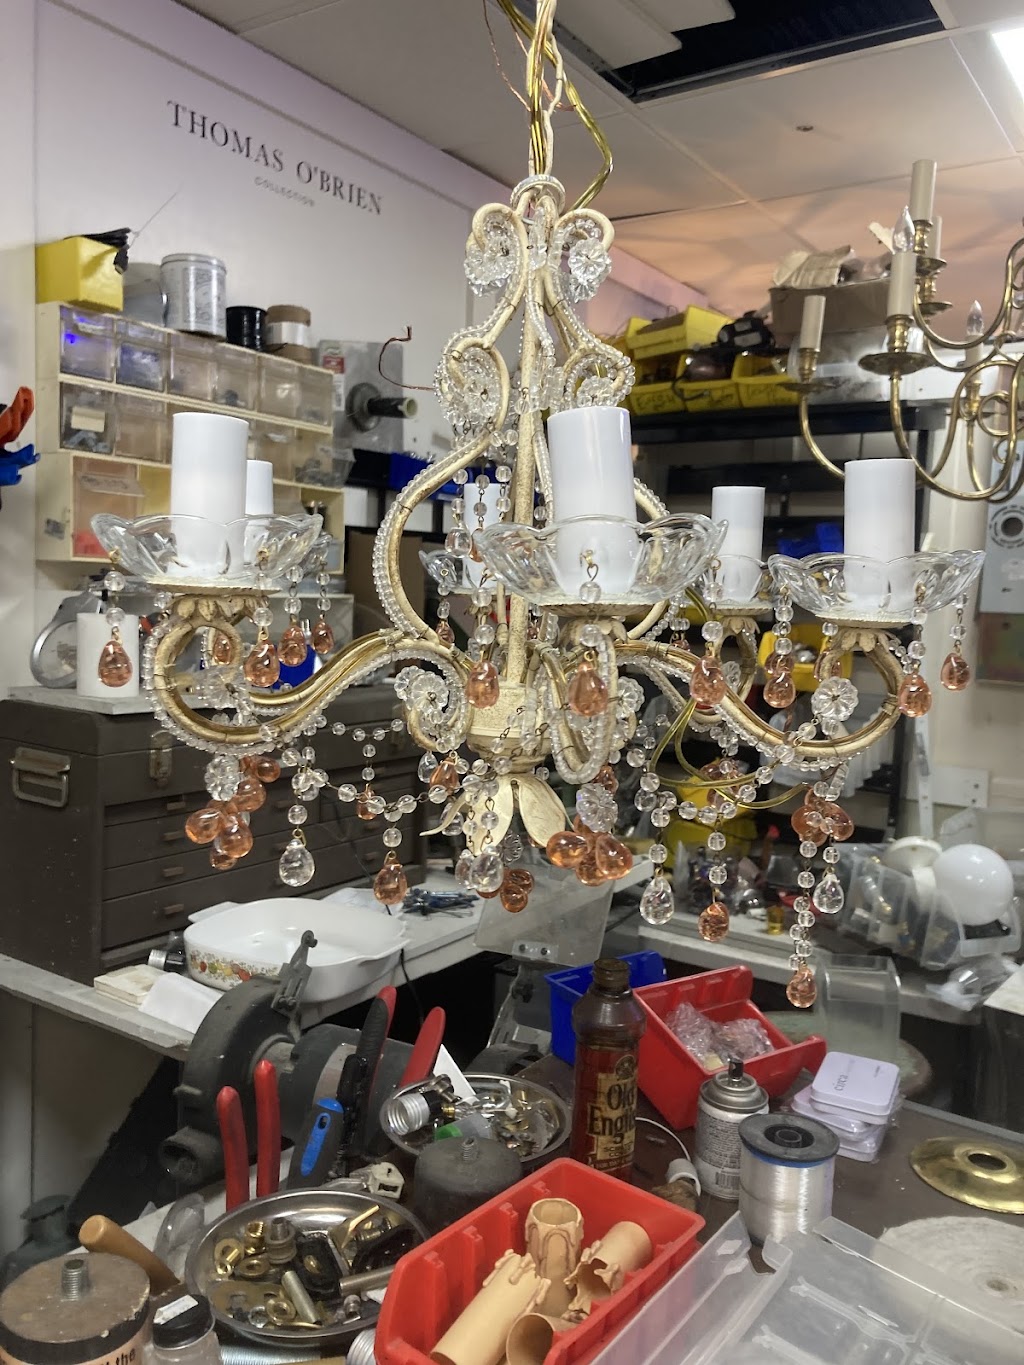 EASTEND lamp repair | 425 County Rd 39A suite 109, Southampton, NY 11968 | Phone: (631) 693-1329